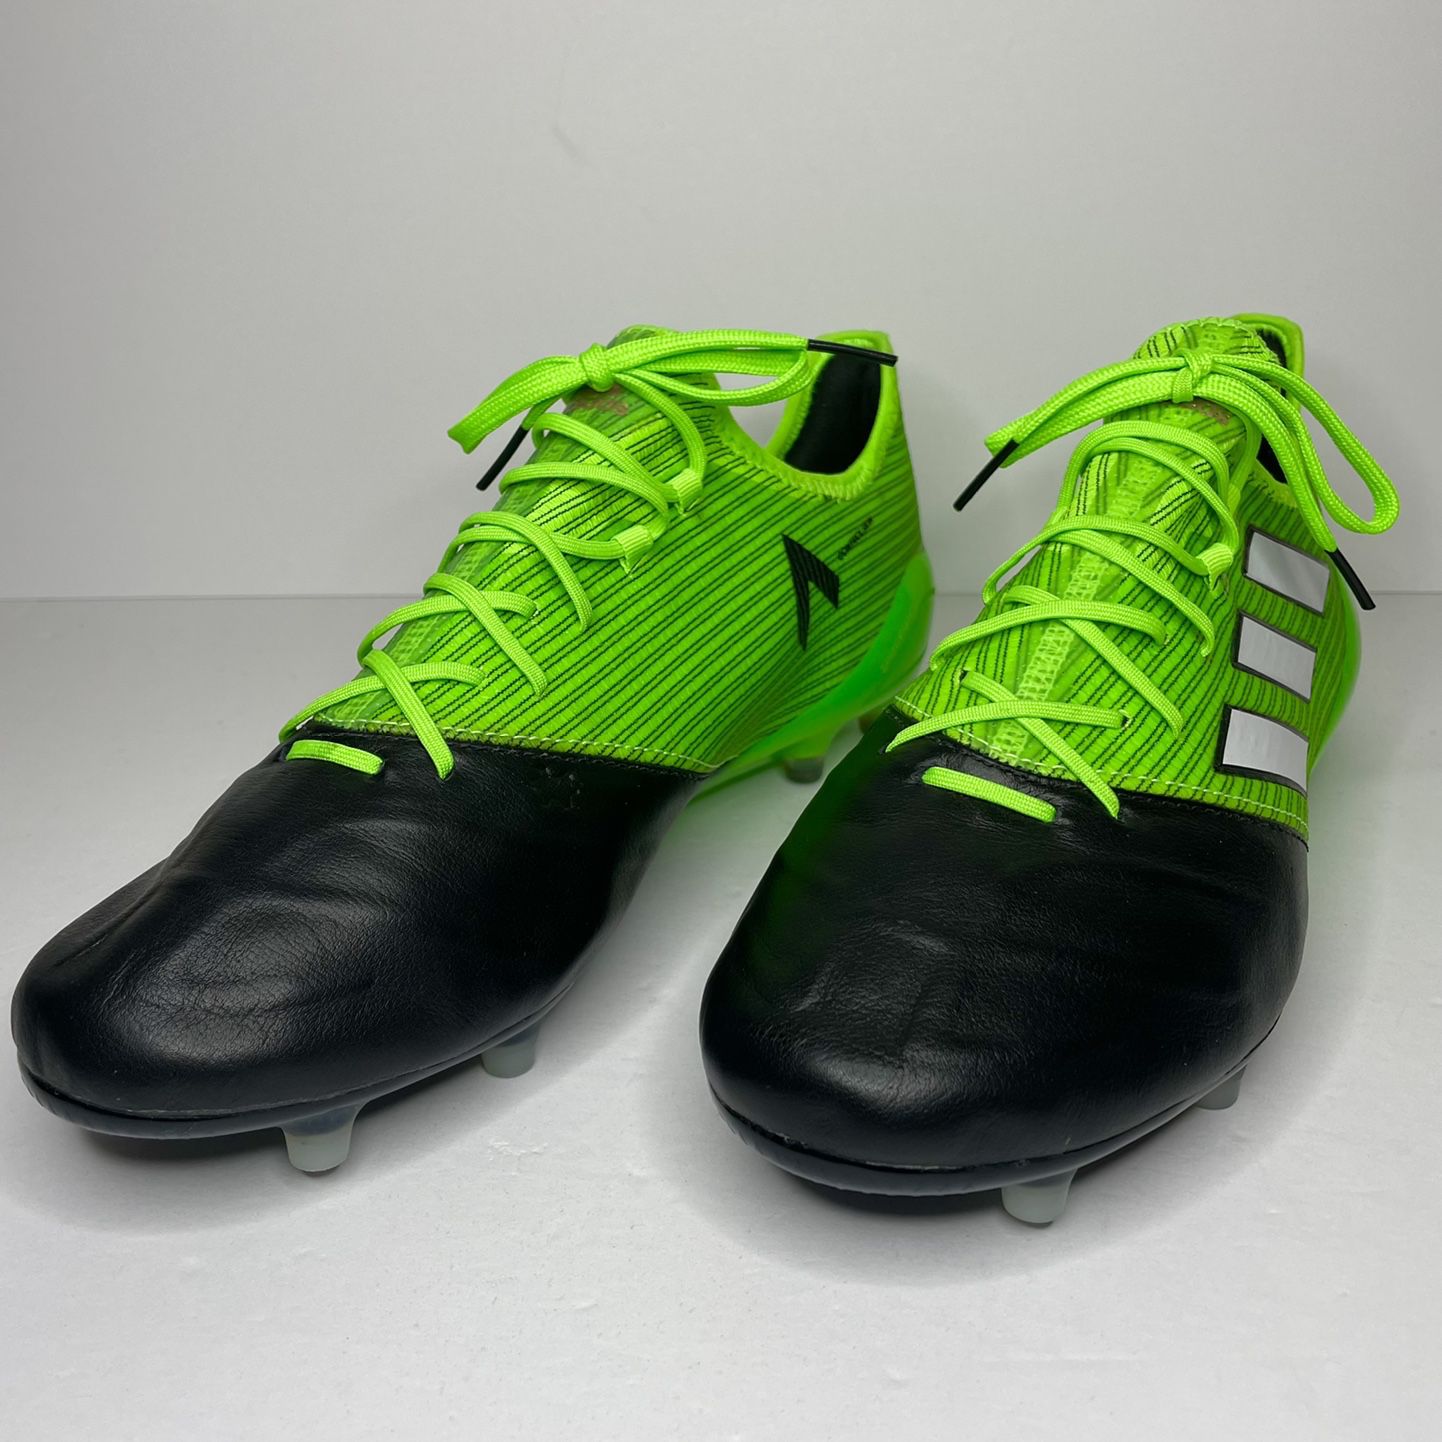 tæppe samtidig stout Adidas Ace 17.1 Leather FG Size 9 for Sale in Spanish Flat, CA - OfferUp